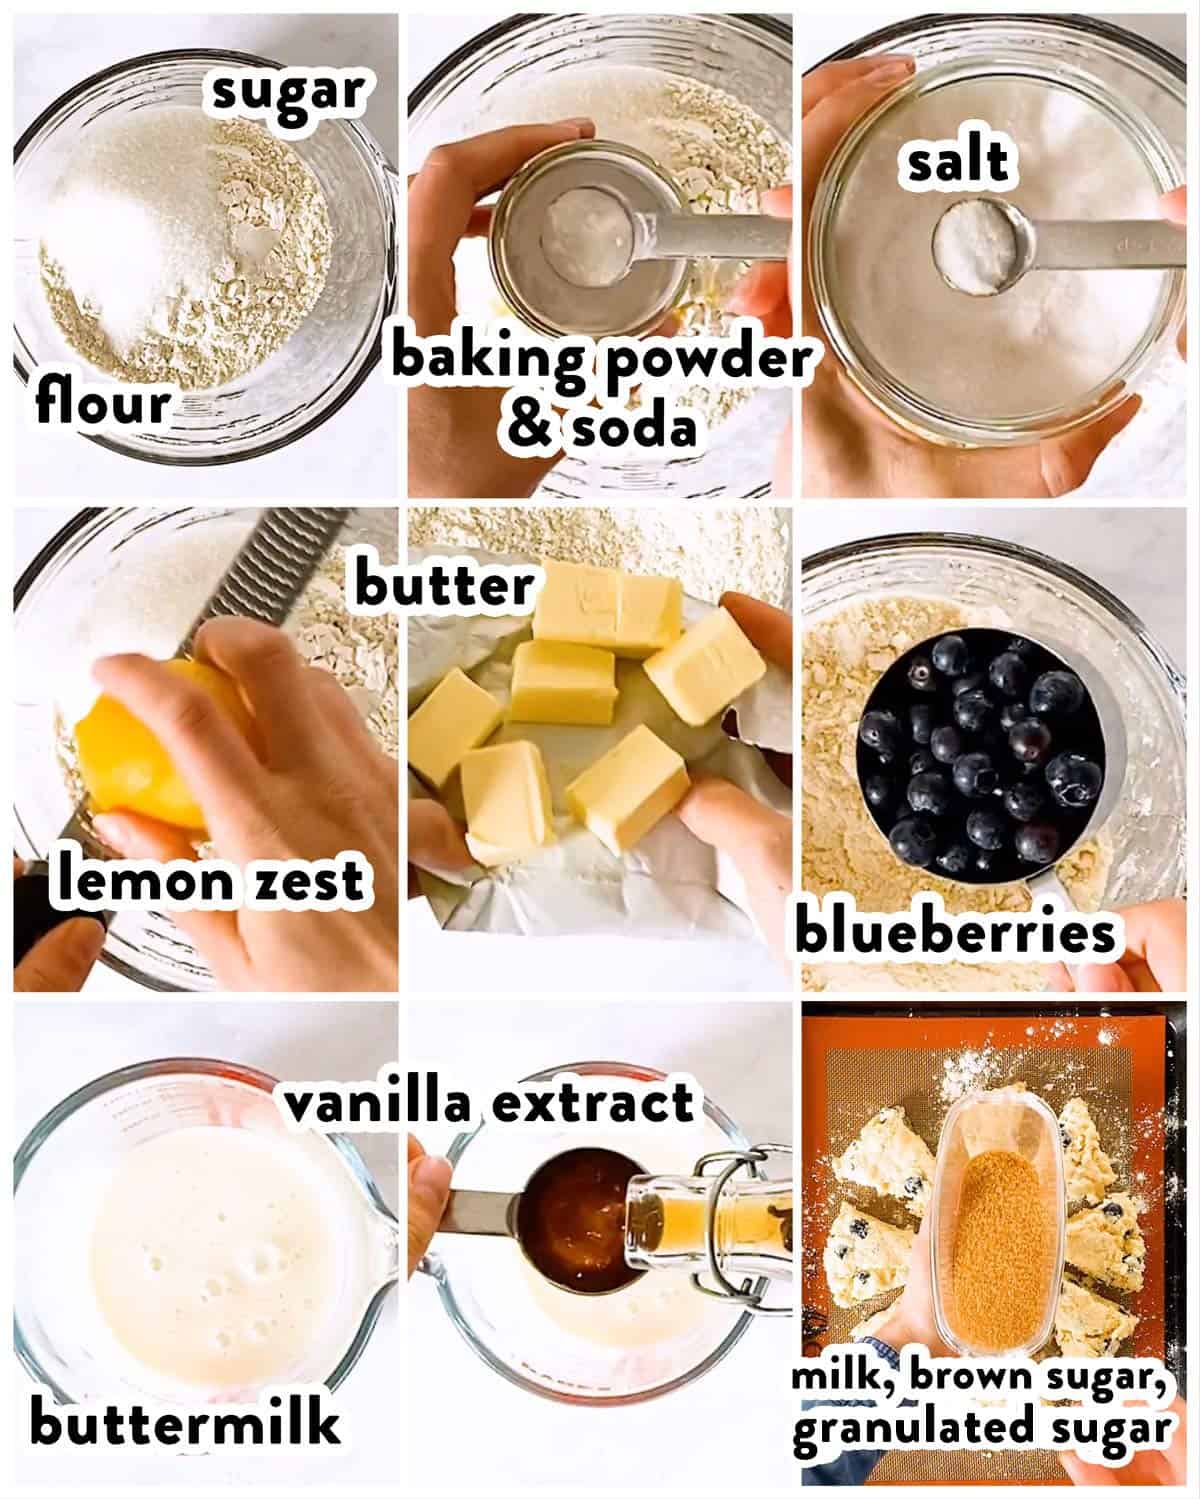 ingredients for blueberry scones with text labels